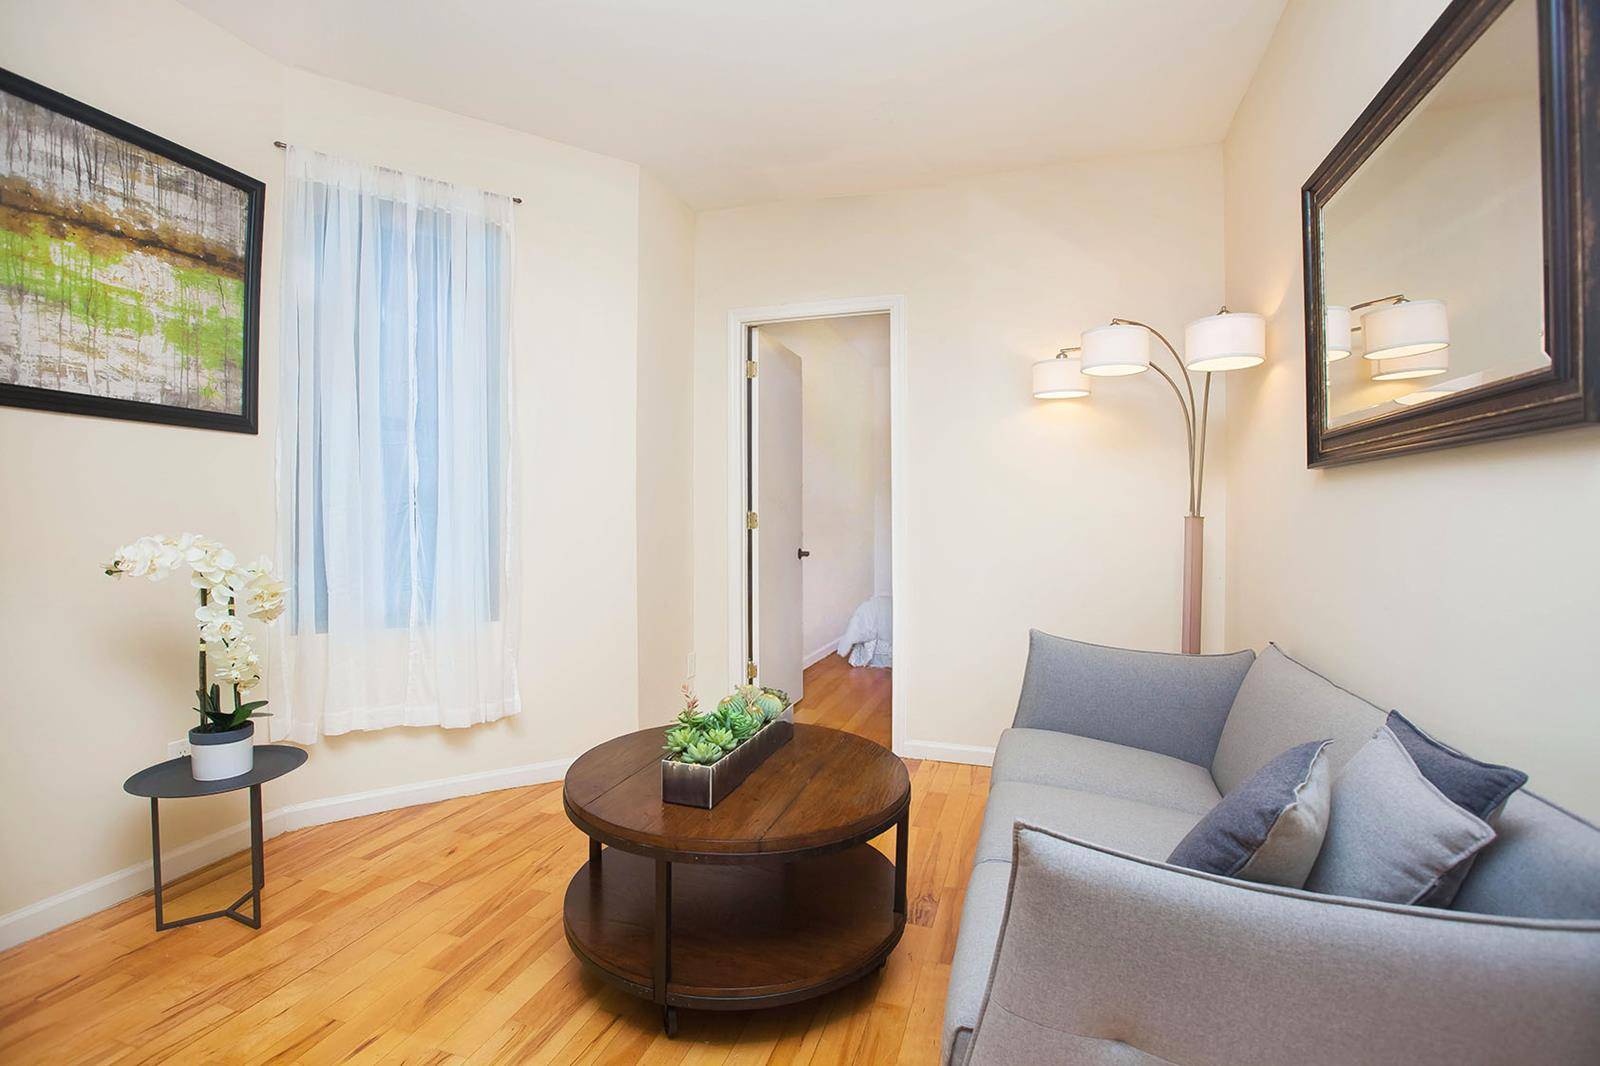 Located in the heart of South Harlem, this recently renovated 1 bedroom Condo is located 3 short blocks from Central Park, near the B, C, 2, 3 subway lines and ...